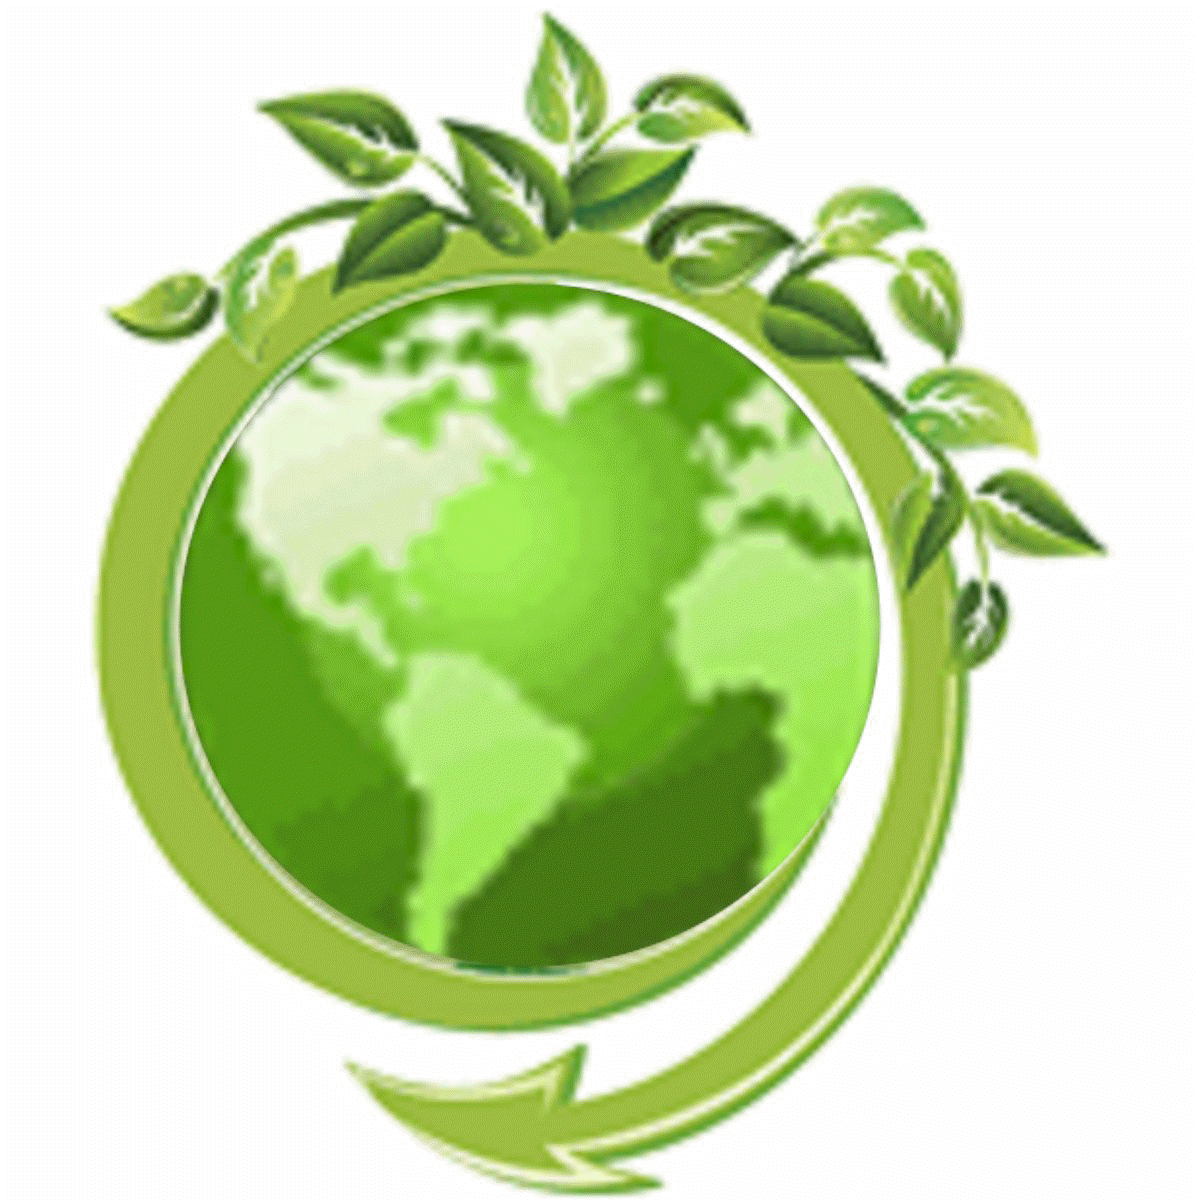 go green clip art pictures - photo #41